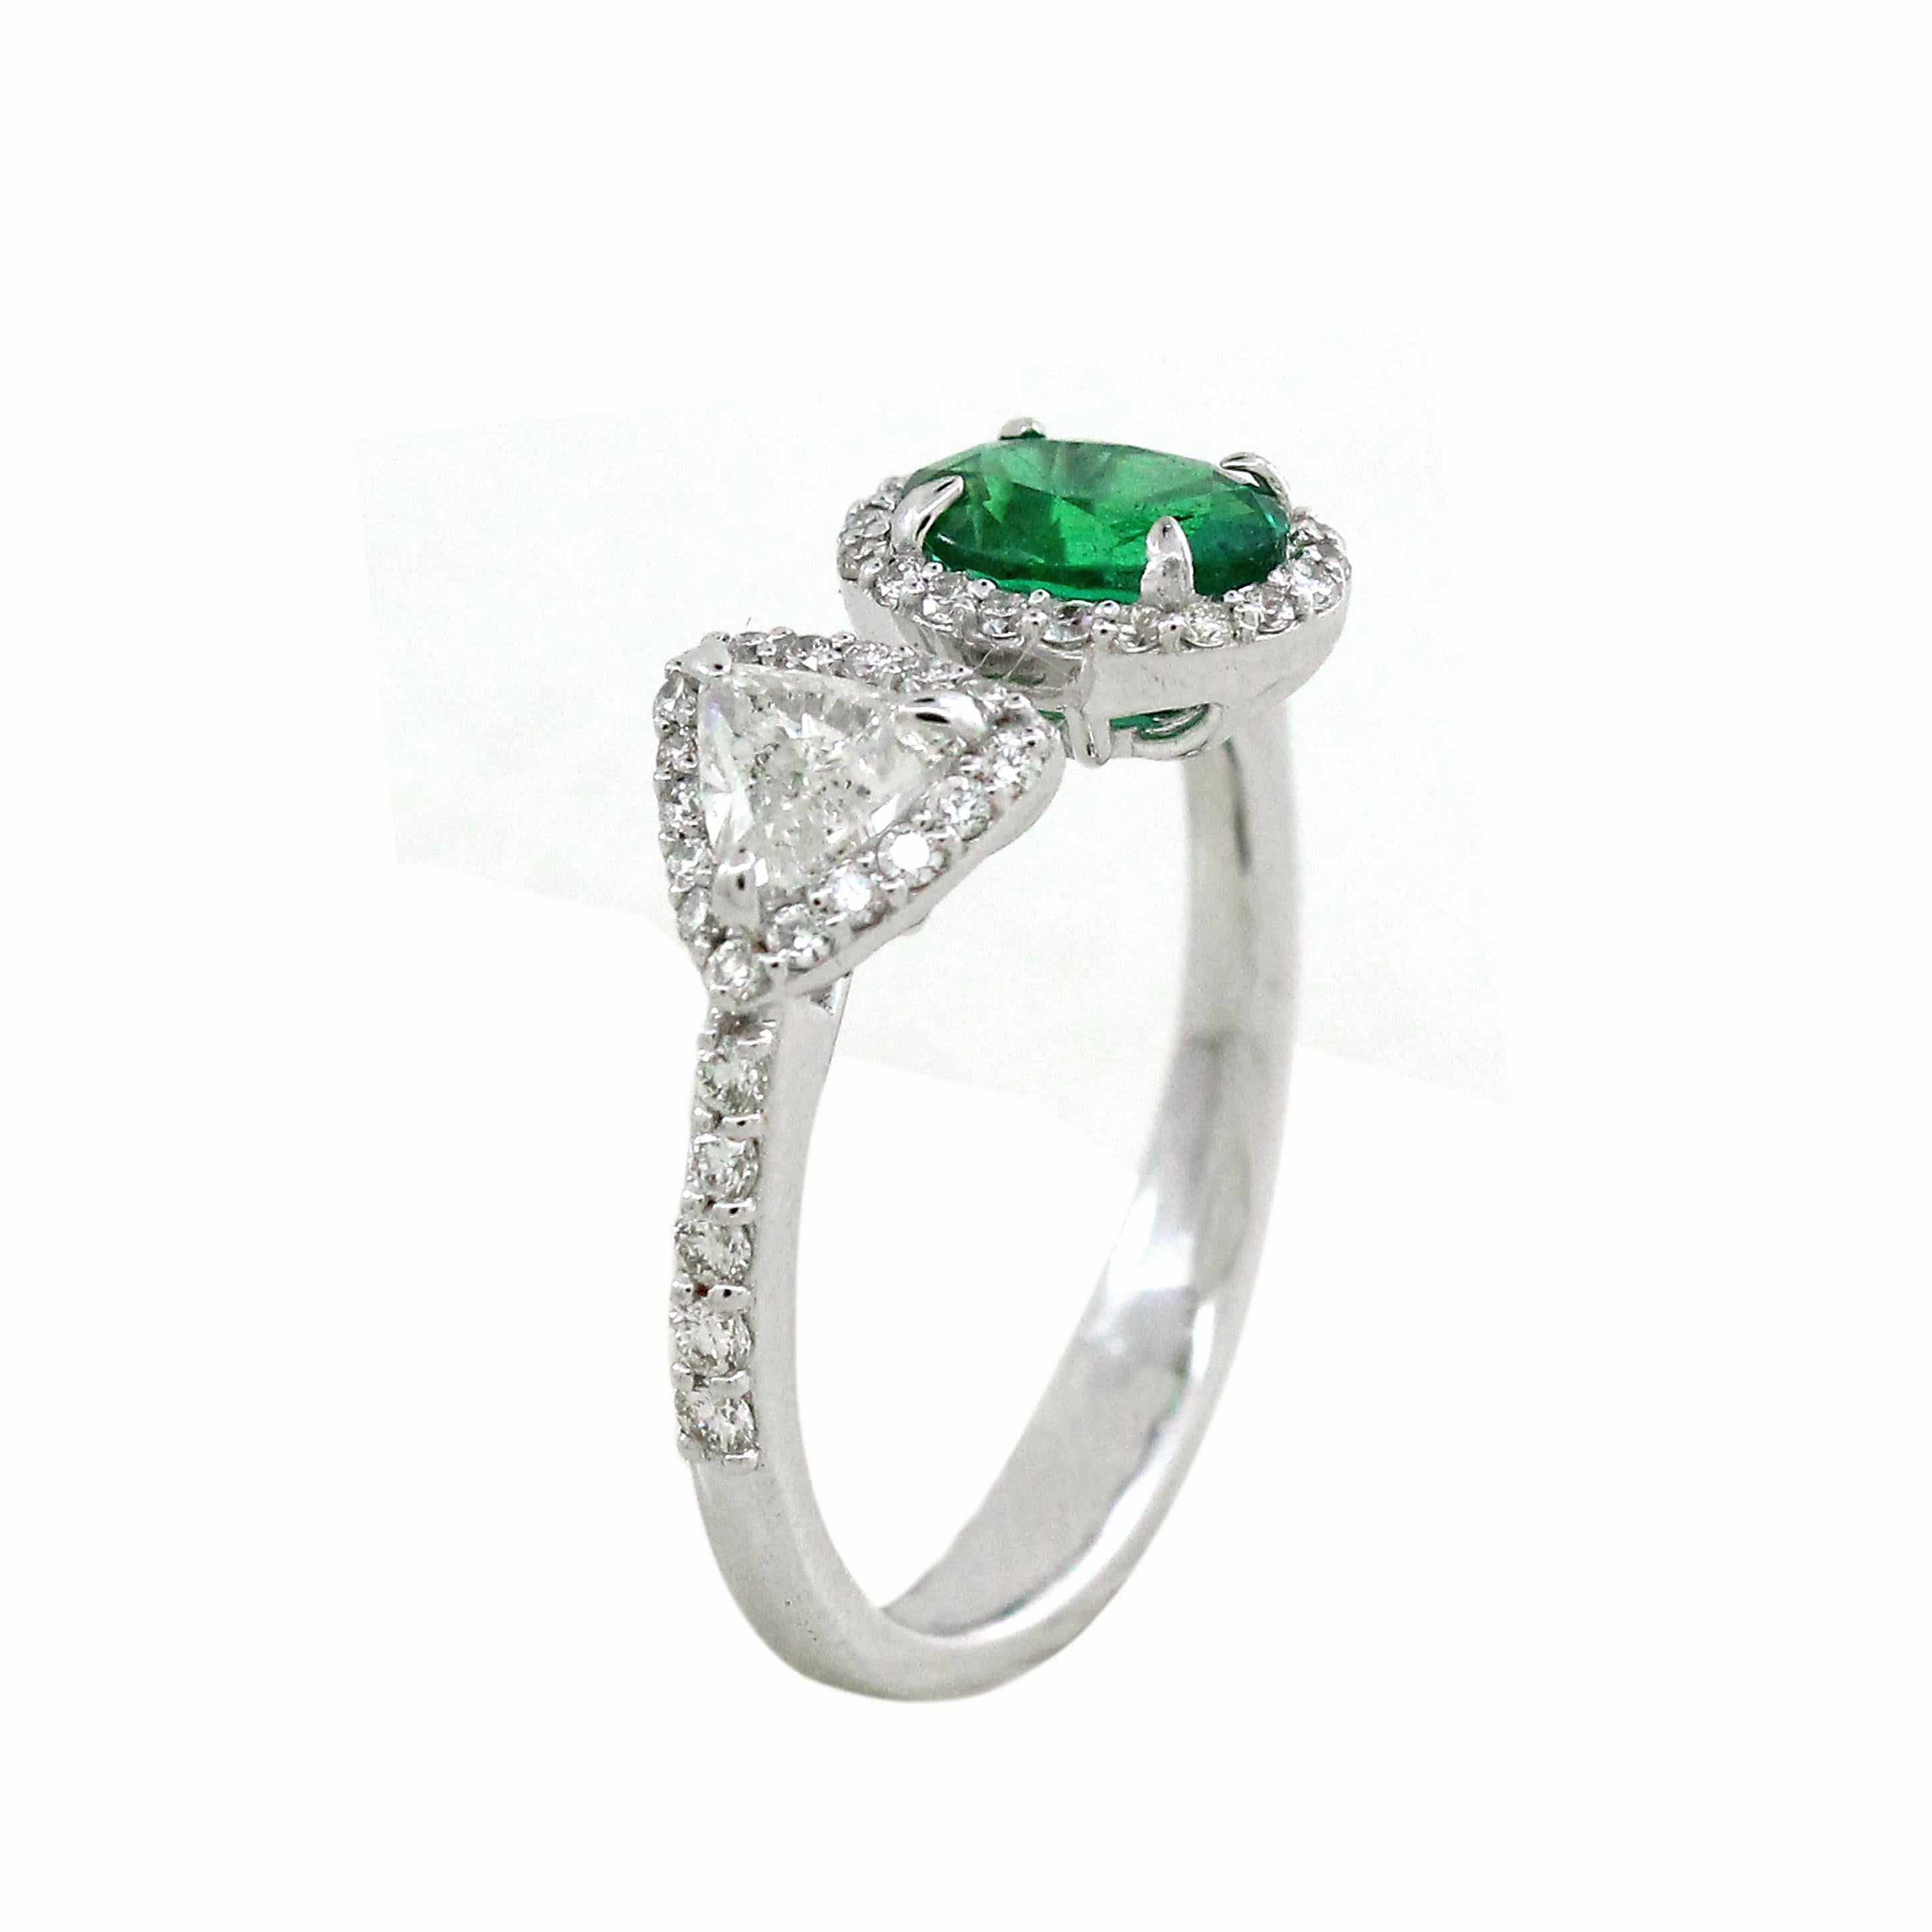 Stunning masterpiece, a resplendent Oval Zambian emerald weighing 0.72 carats sits majestically between halo of 46 brilliant cut white diamonds totaling to 0.31 carats. This vibrant green gemstone symbolizes eternal love and growth. Fancy Trillion